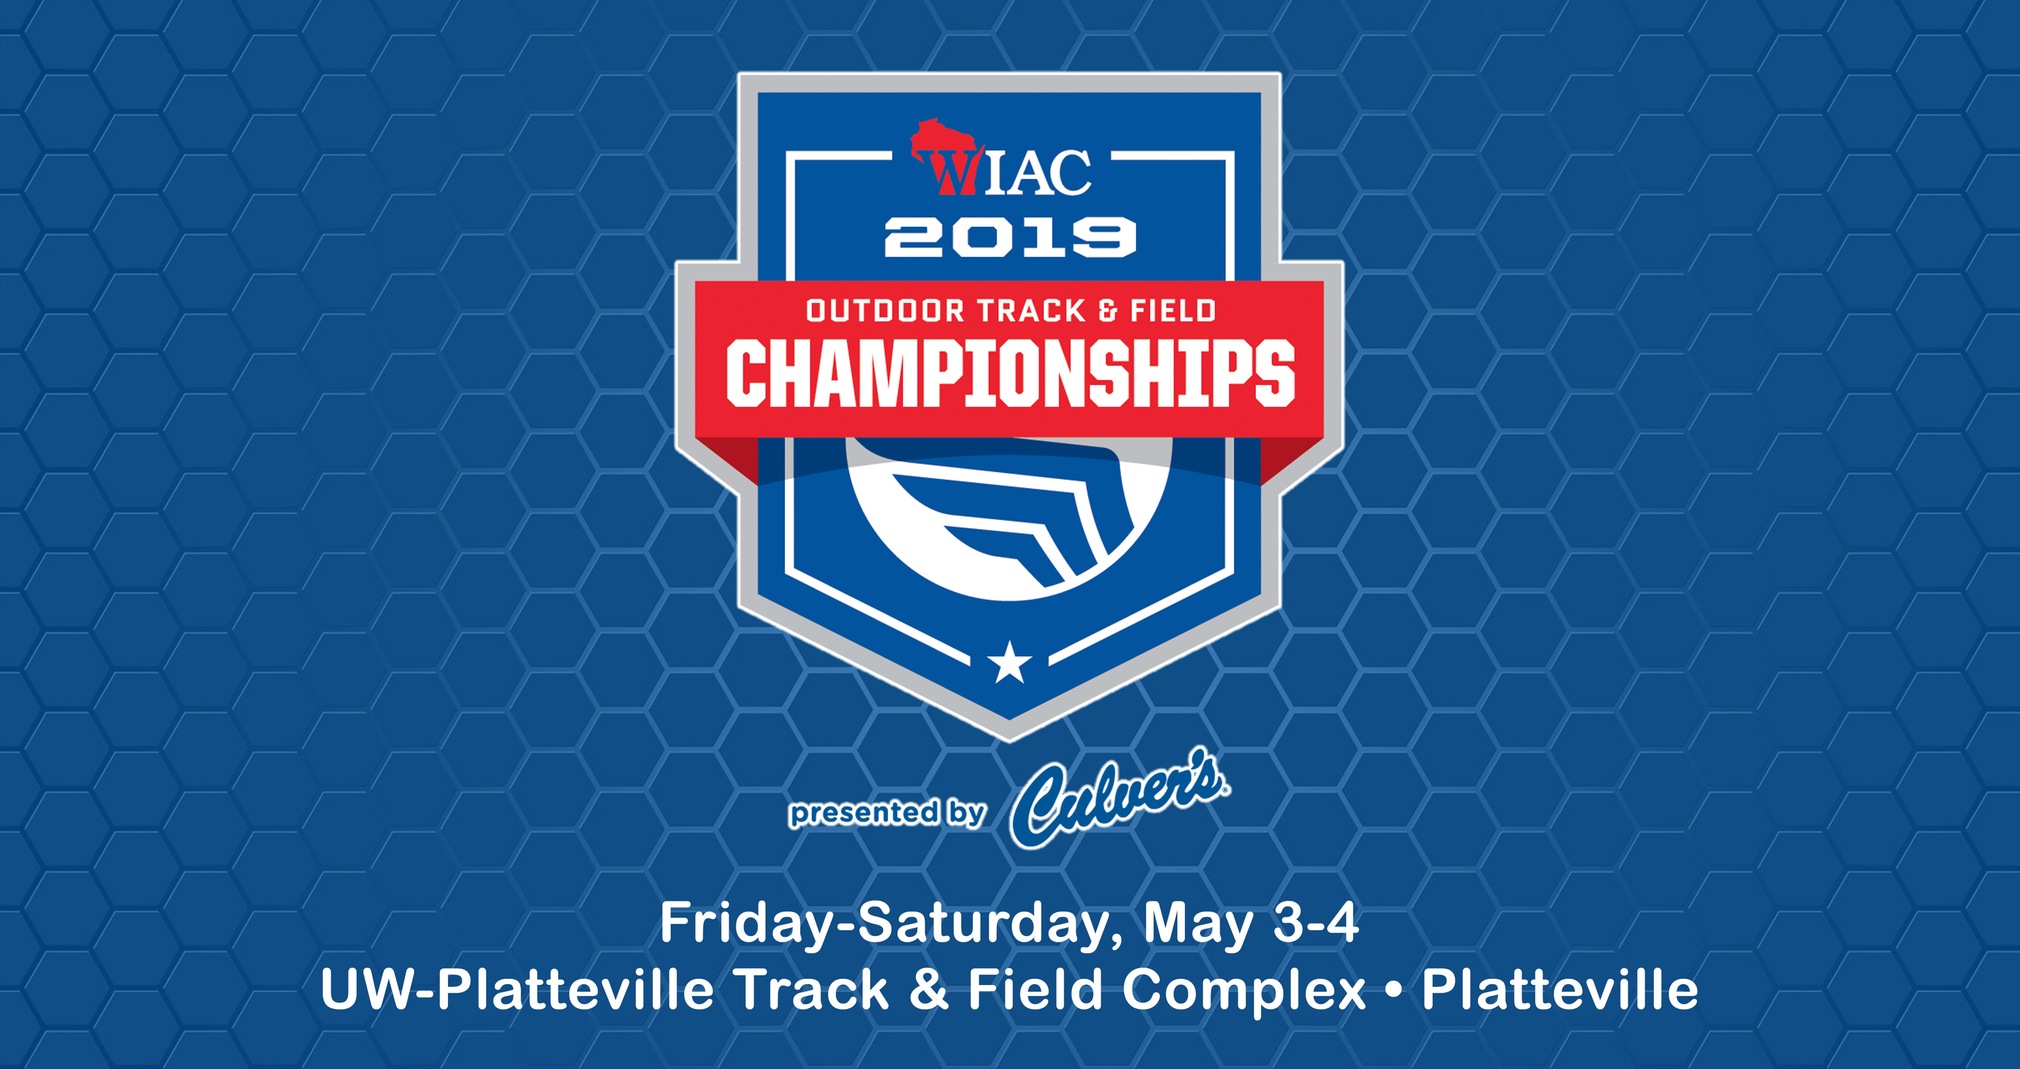 Titans To Perform At WIAC Outdoor Championship